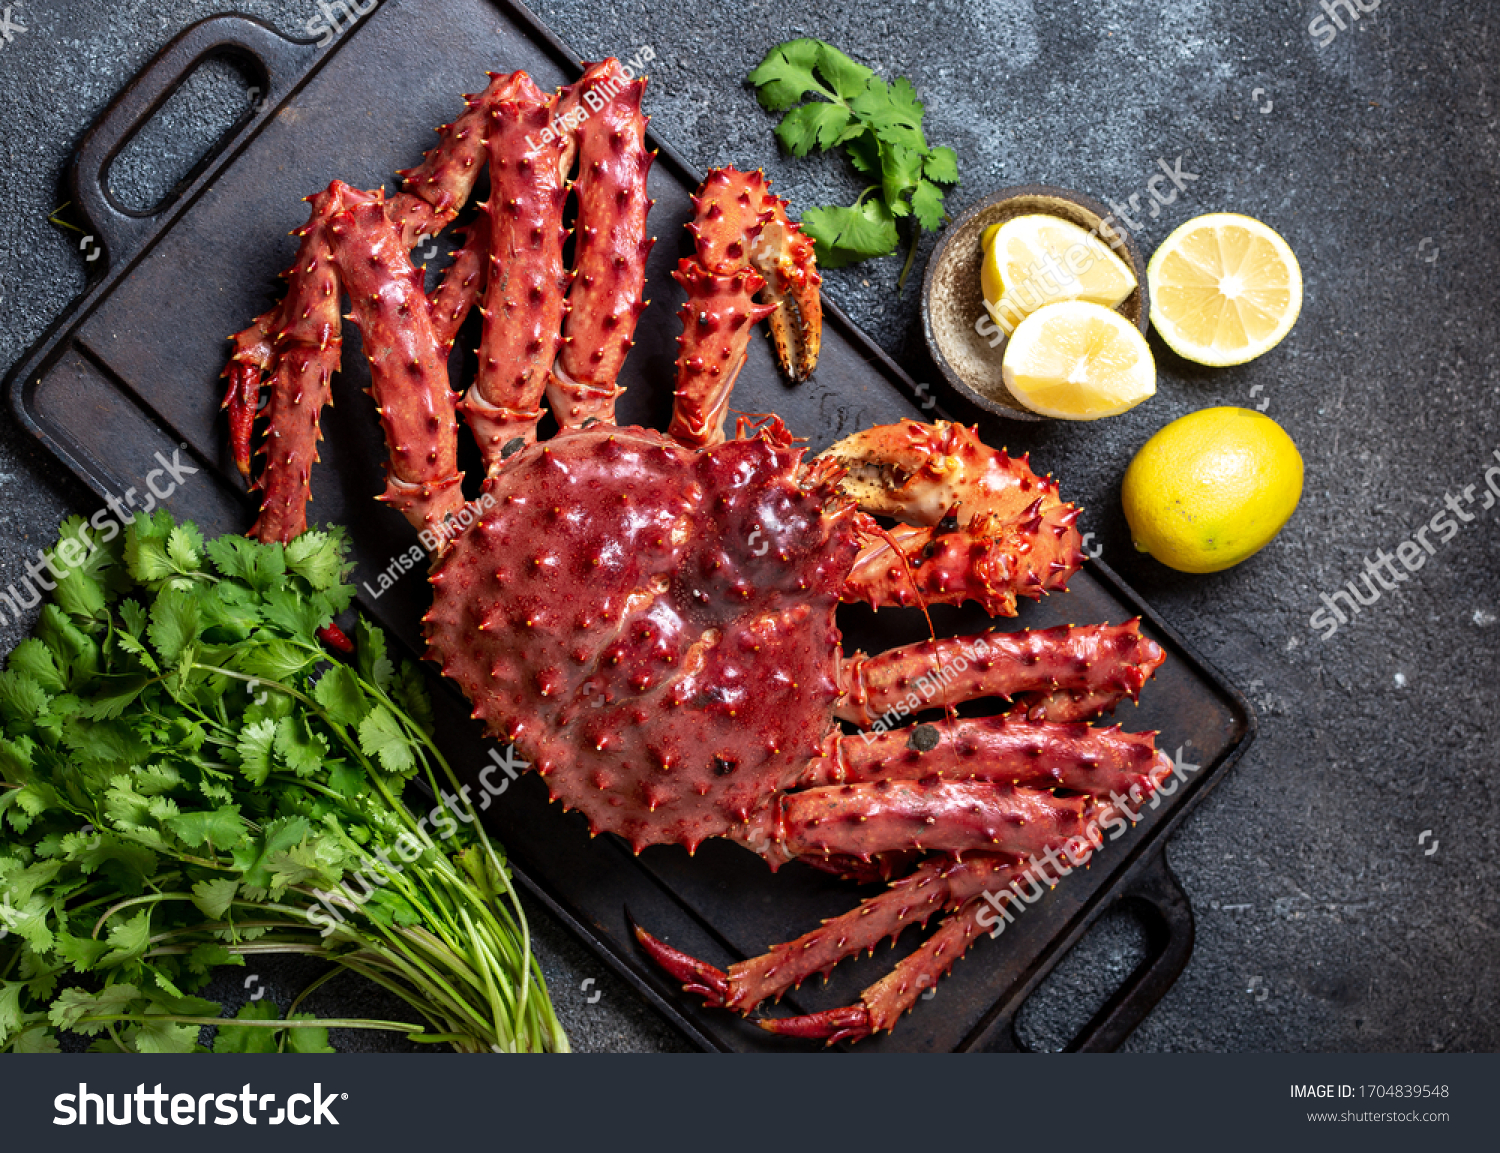 King Crab with lemon and cilantro on black background. Top view. #1704839548